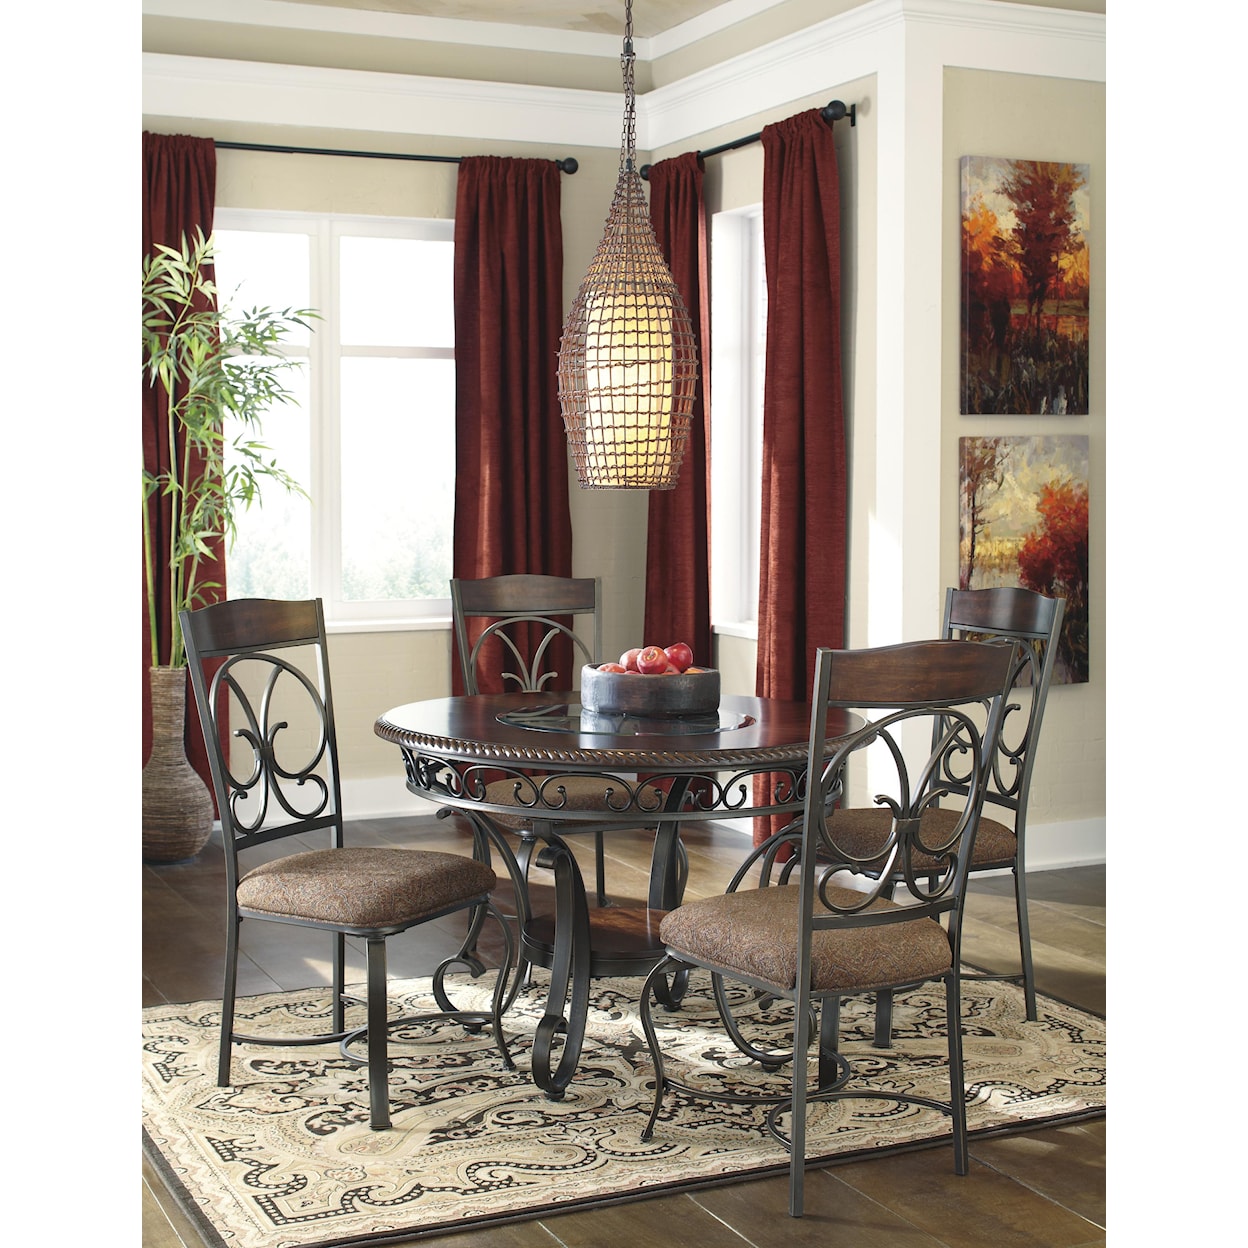 Signature Design by Ashley Glambrey Round Dining Room Table